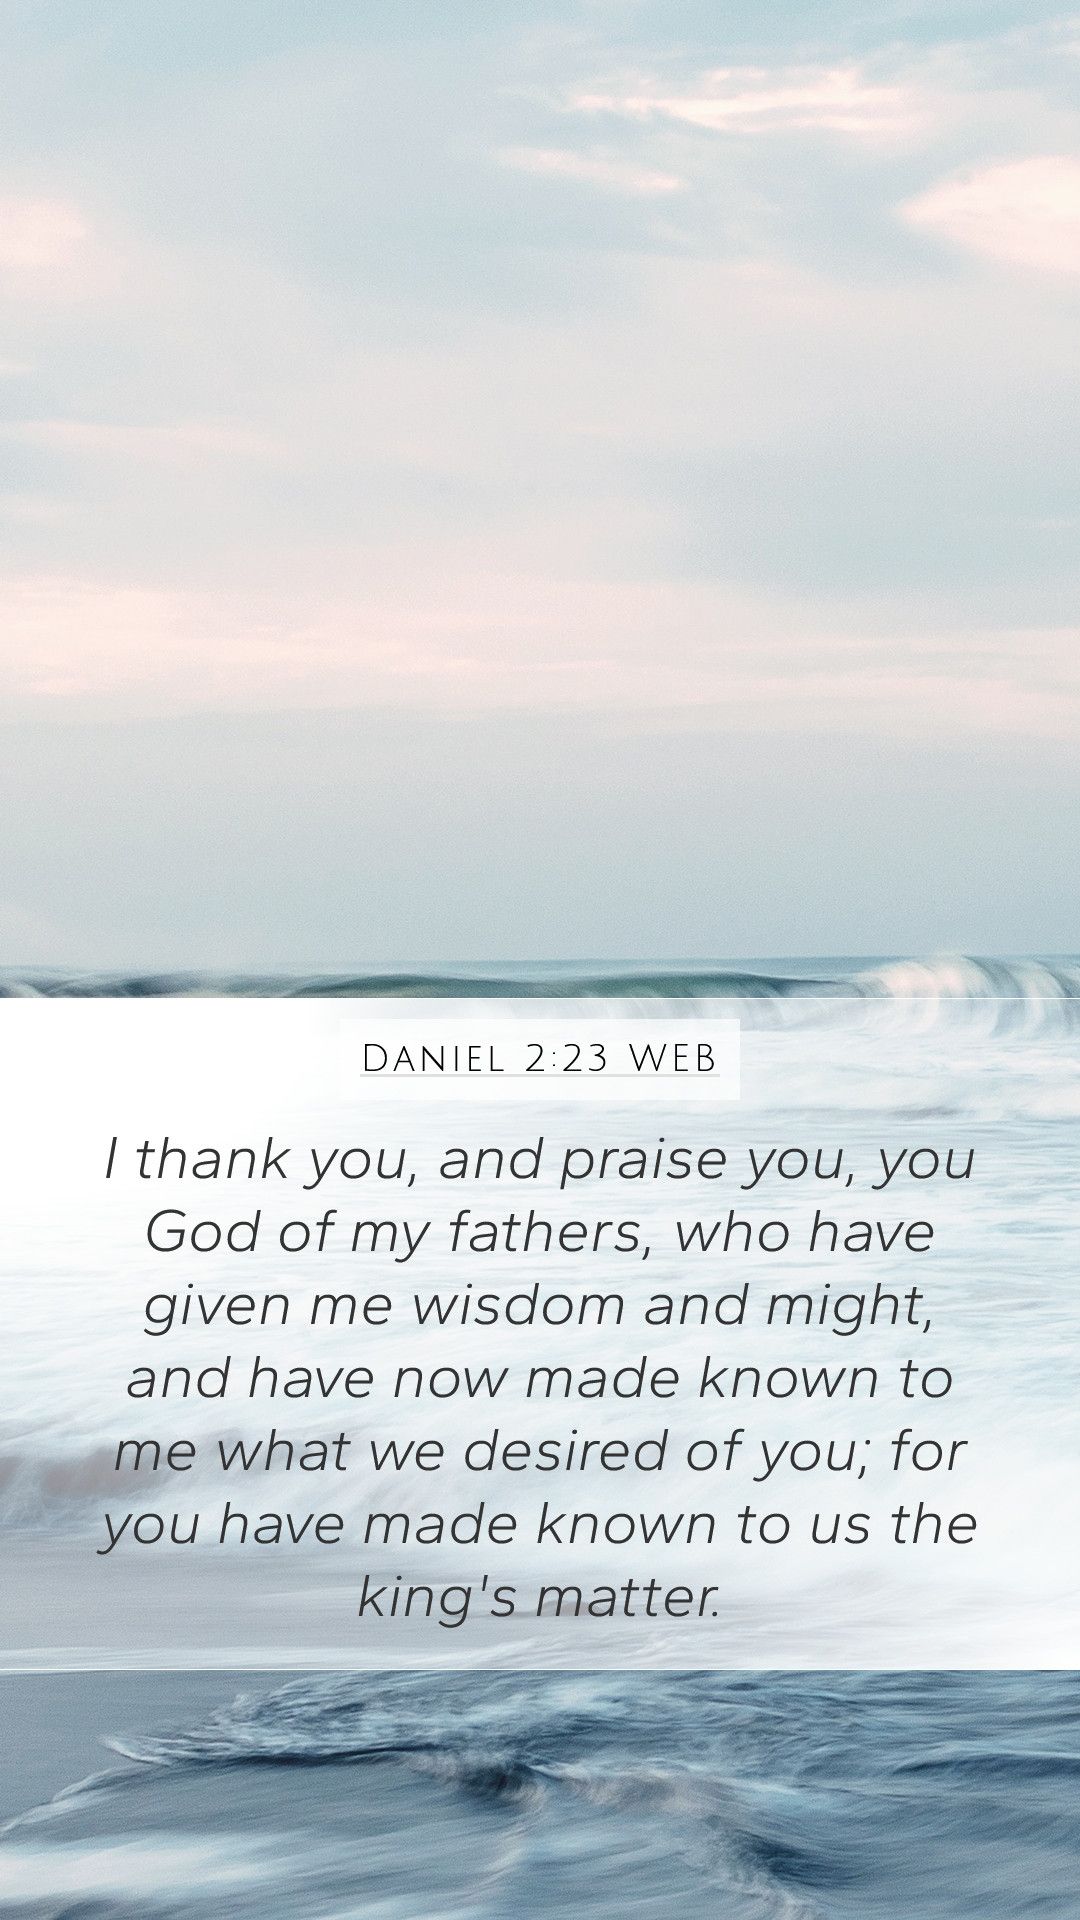 Daniel 2:23 WEB Mobile Phone Wallpaper thank you, and praise you, you God of my